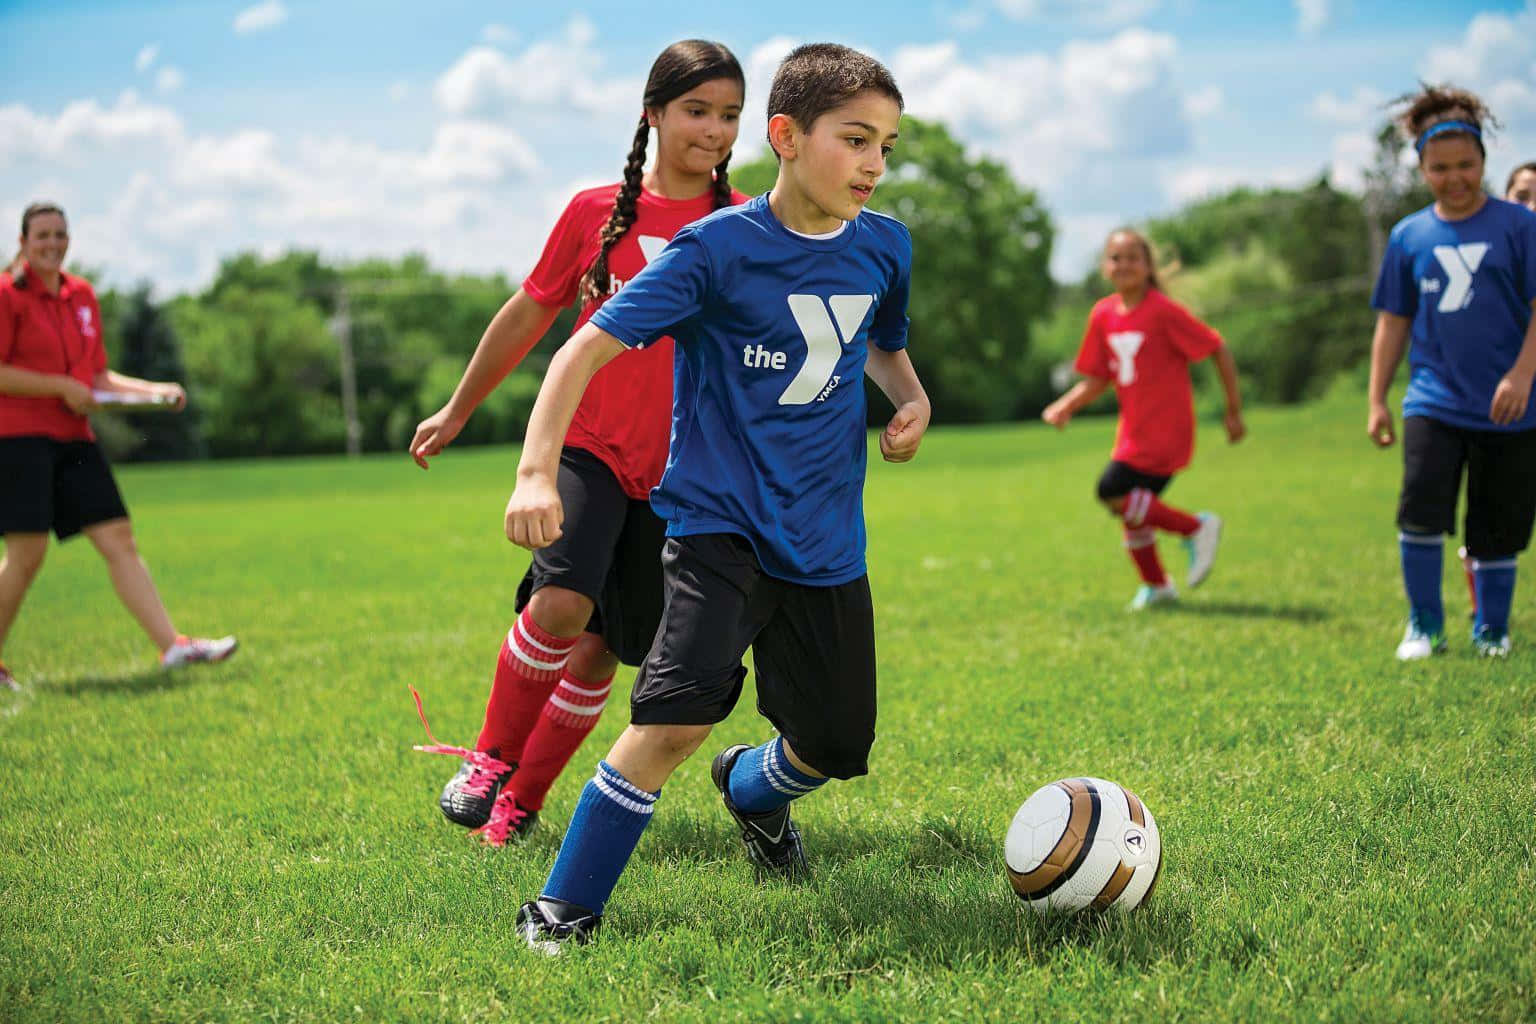 Youth Soccer Game Action.jpg Wallpaper